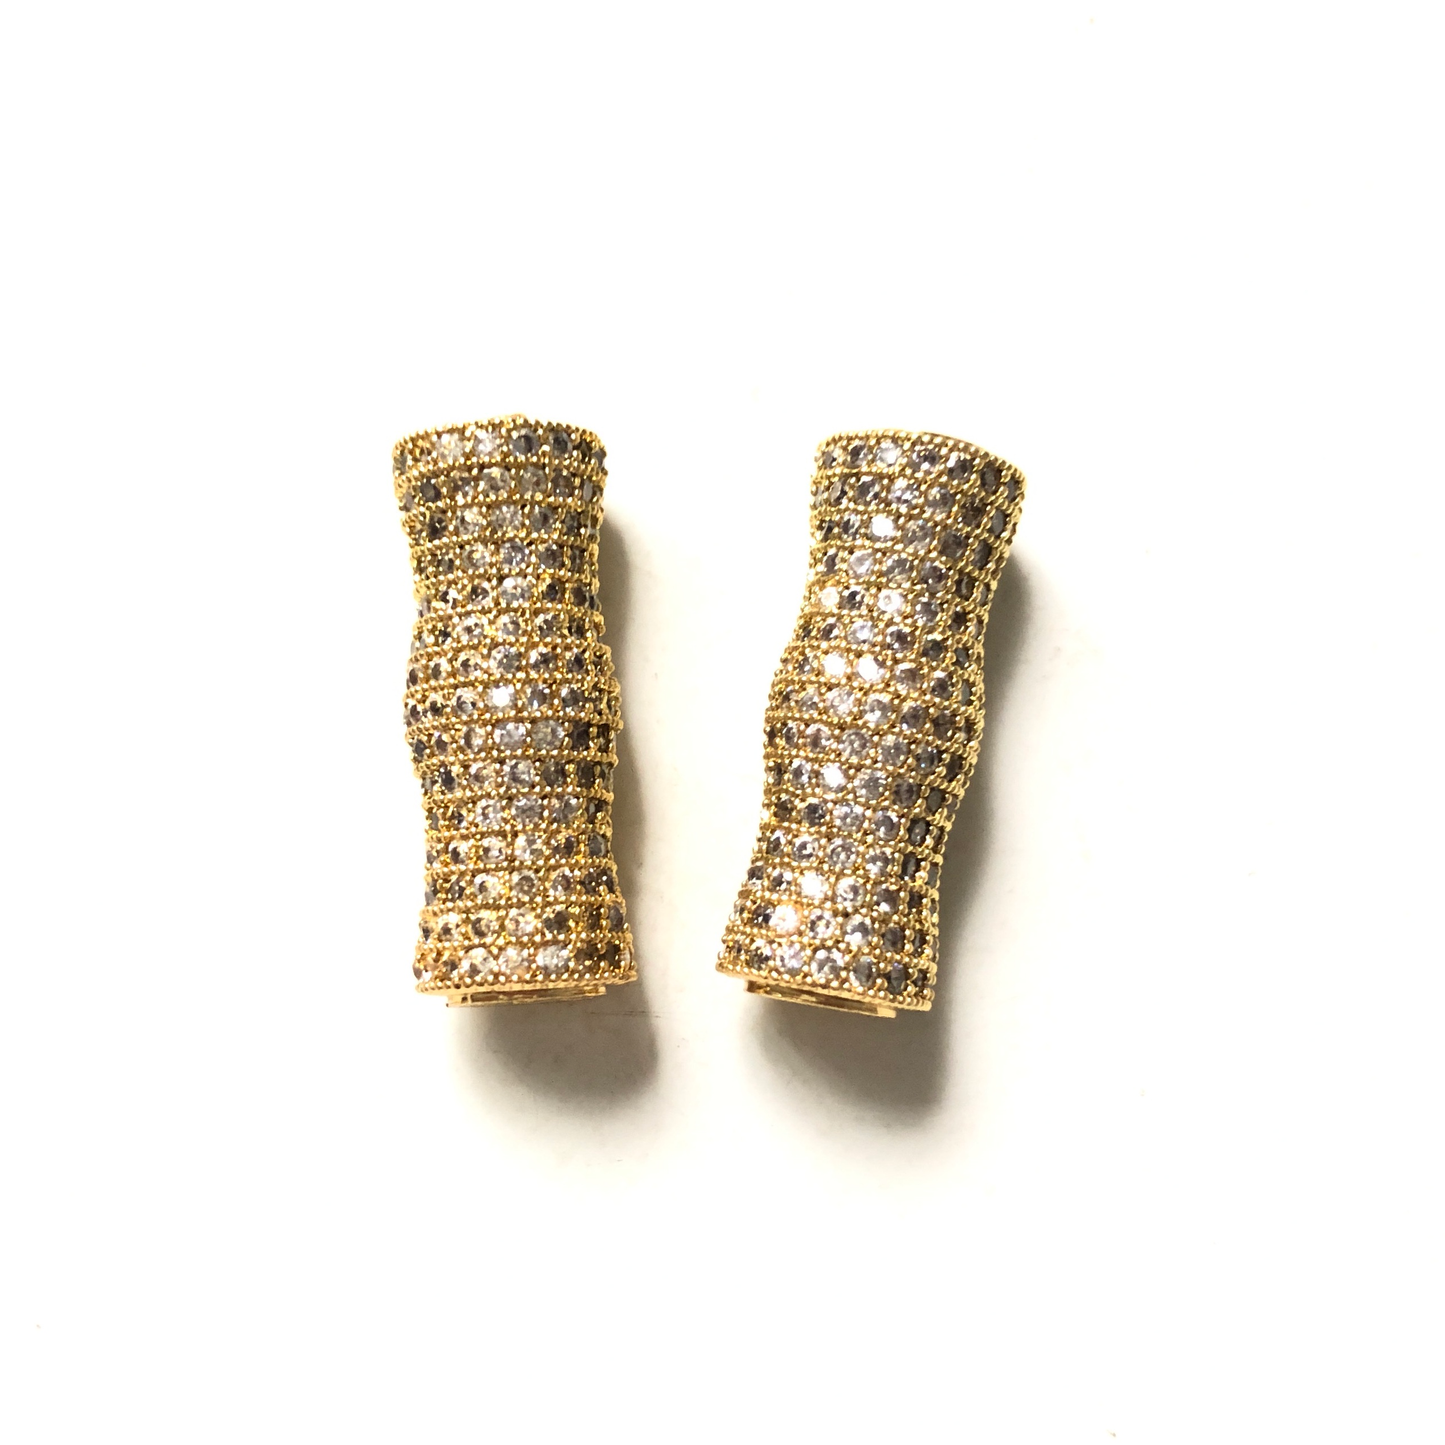 5-10pcs/lot 27.5*10mm CZ Paved Wave Tube Bar Spacers Gold CZ Paved Spacers Tube Bar Centerpieces Charms Beads Beyond